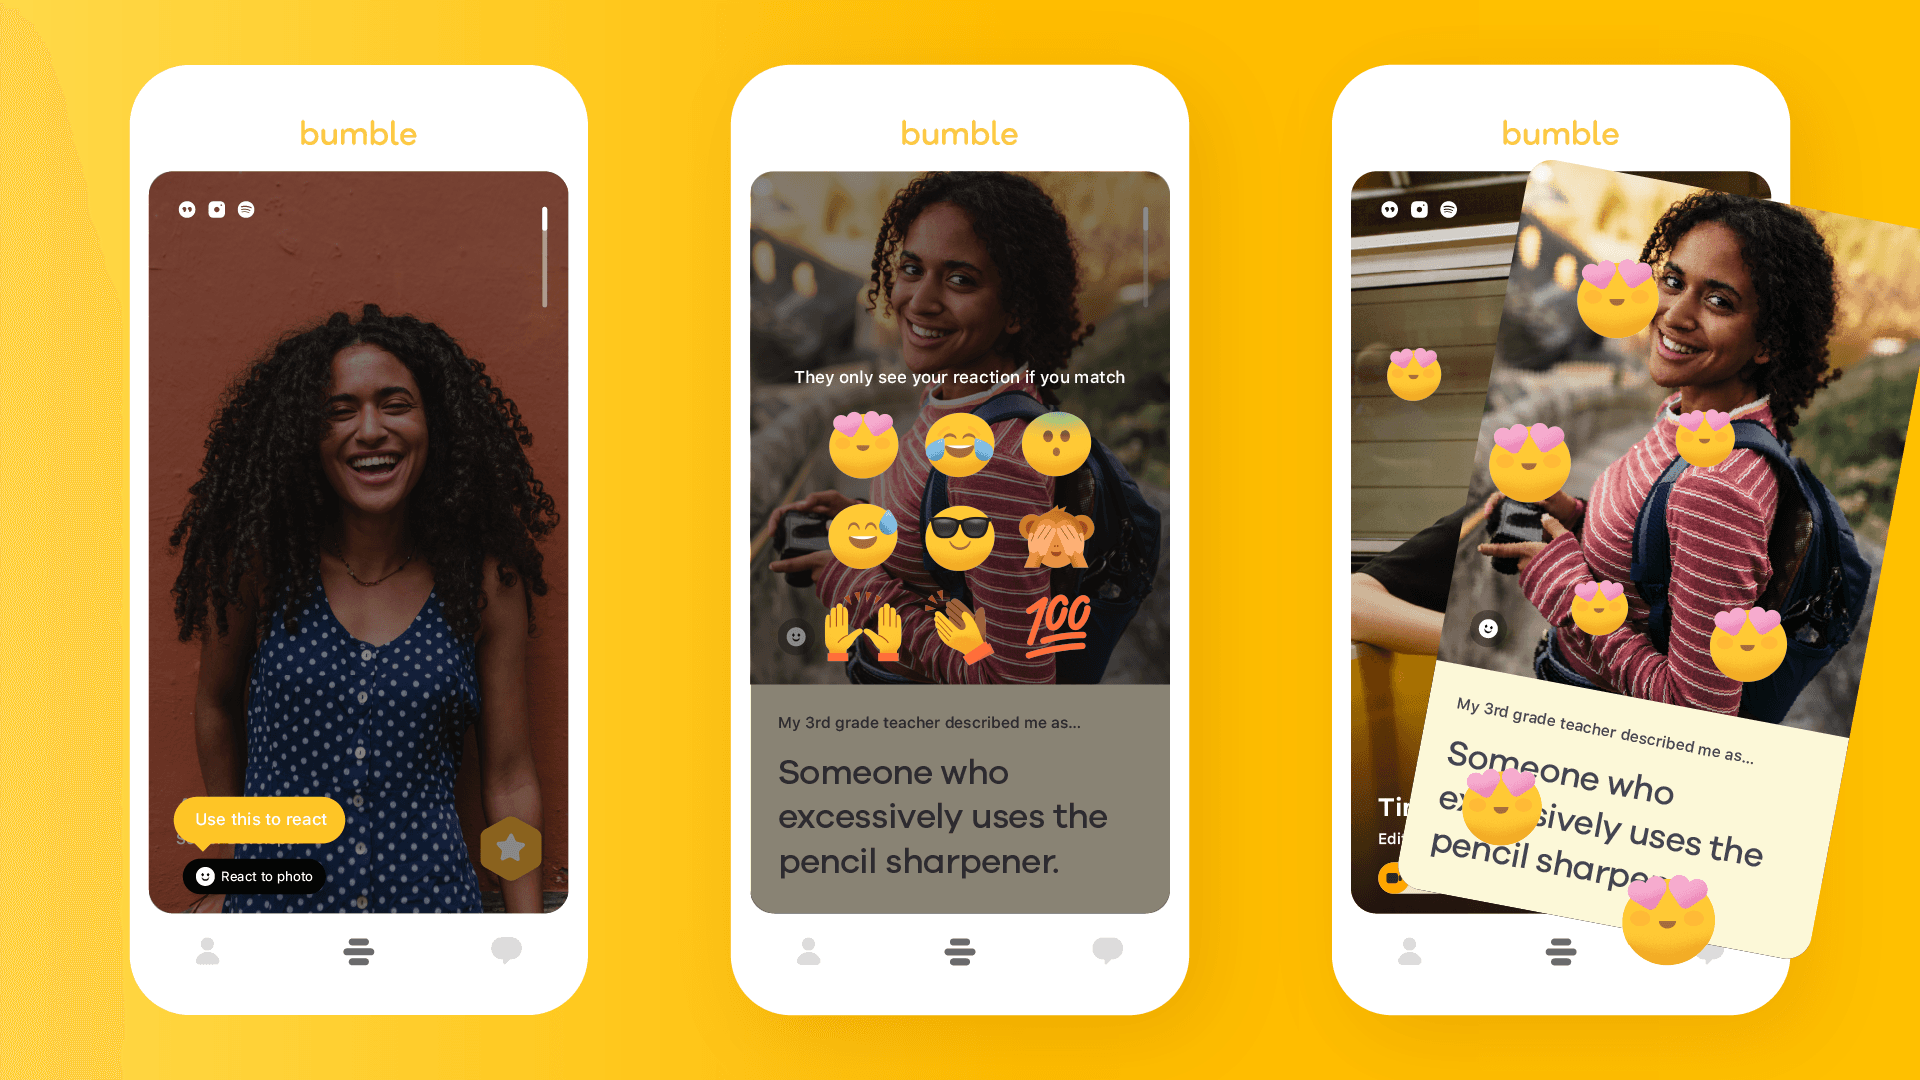 How to Use Bumble’s New Emoji Reactions Feature